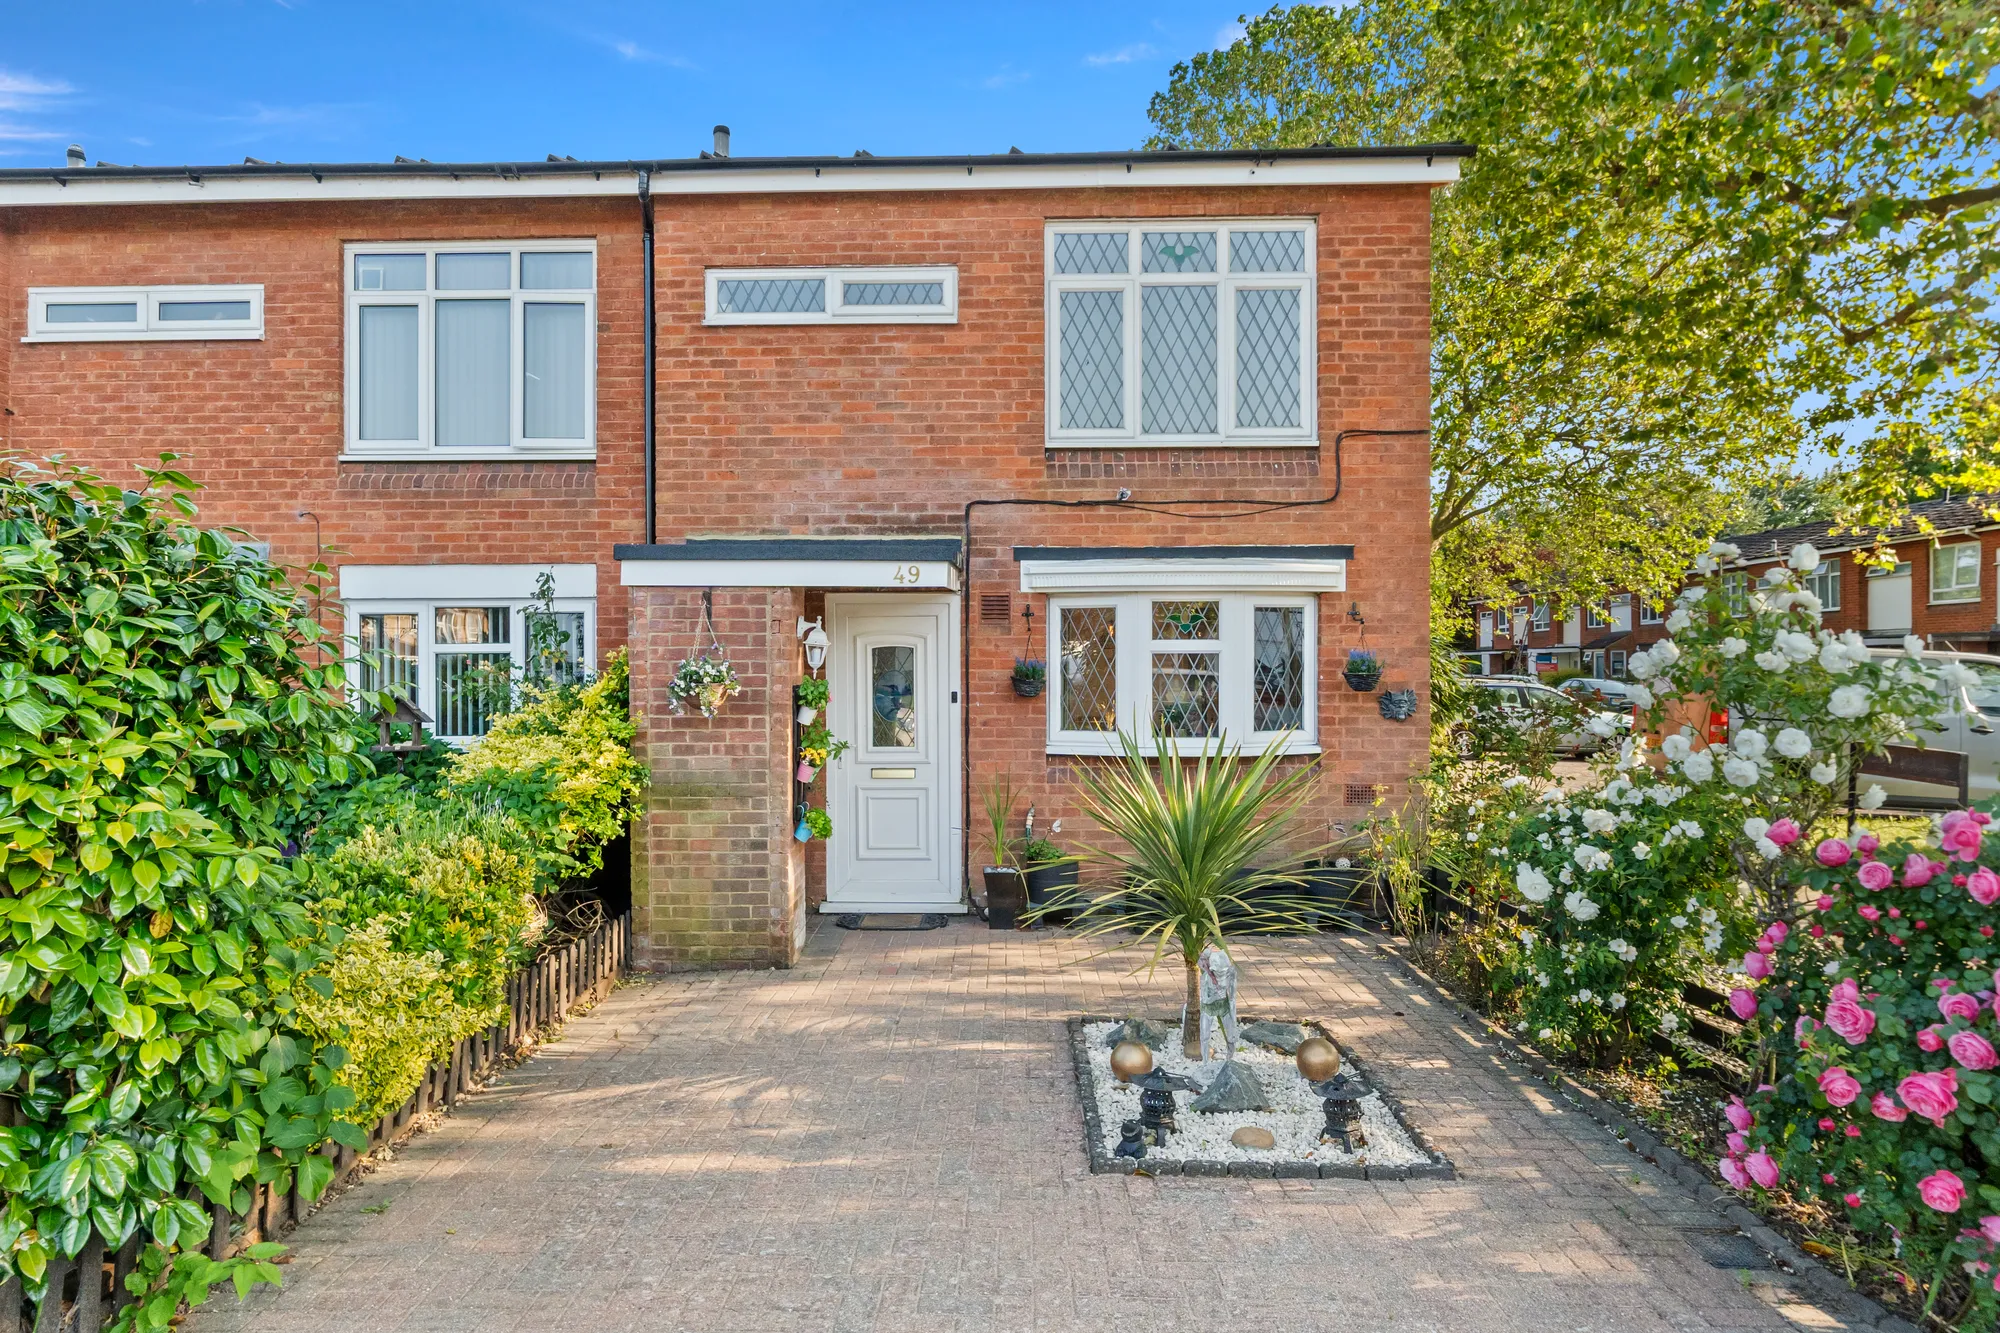 4 bed end of terrace house for sale in Bingham Drive, Staines-Upon-Thames - Property Image 1